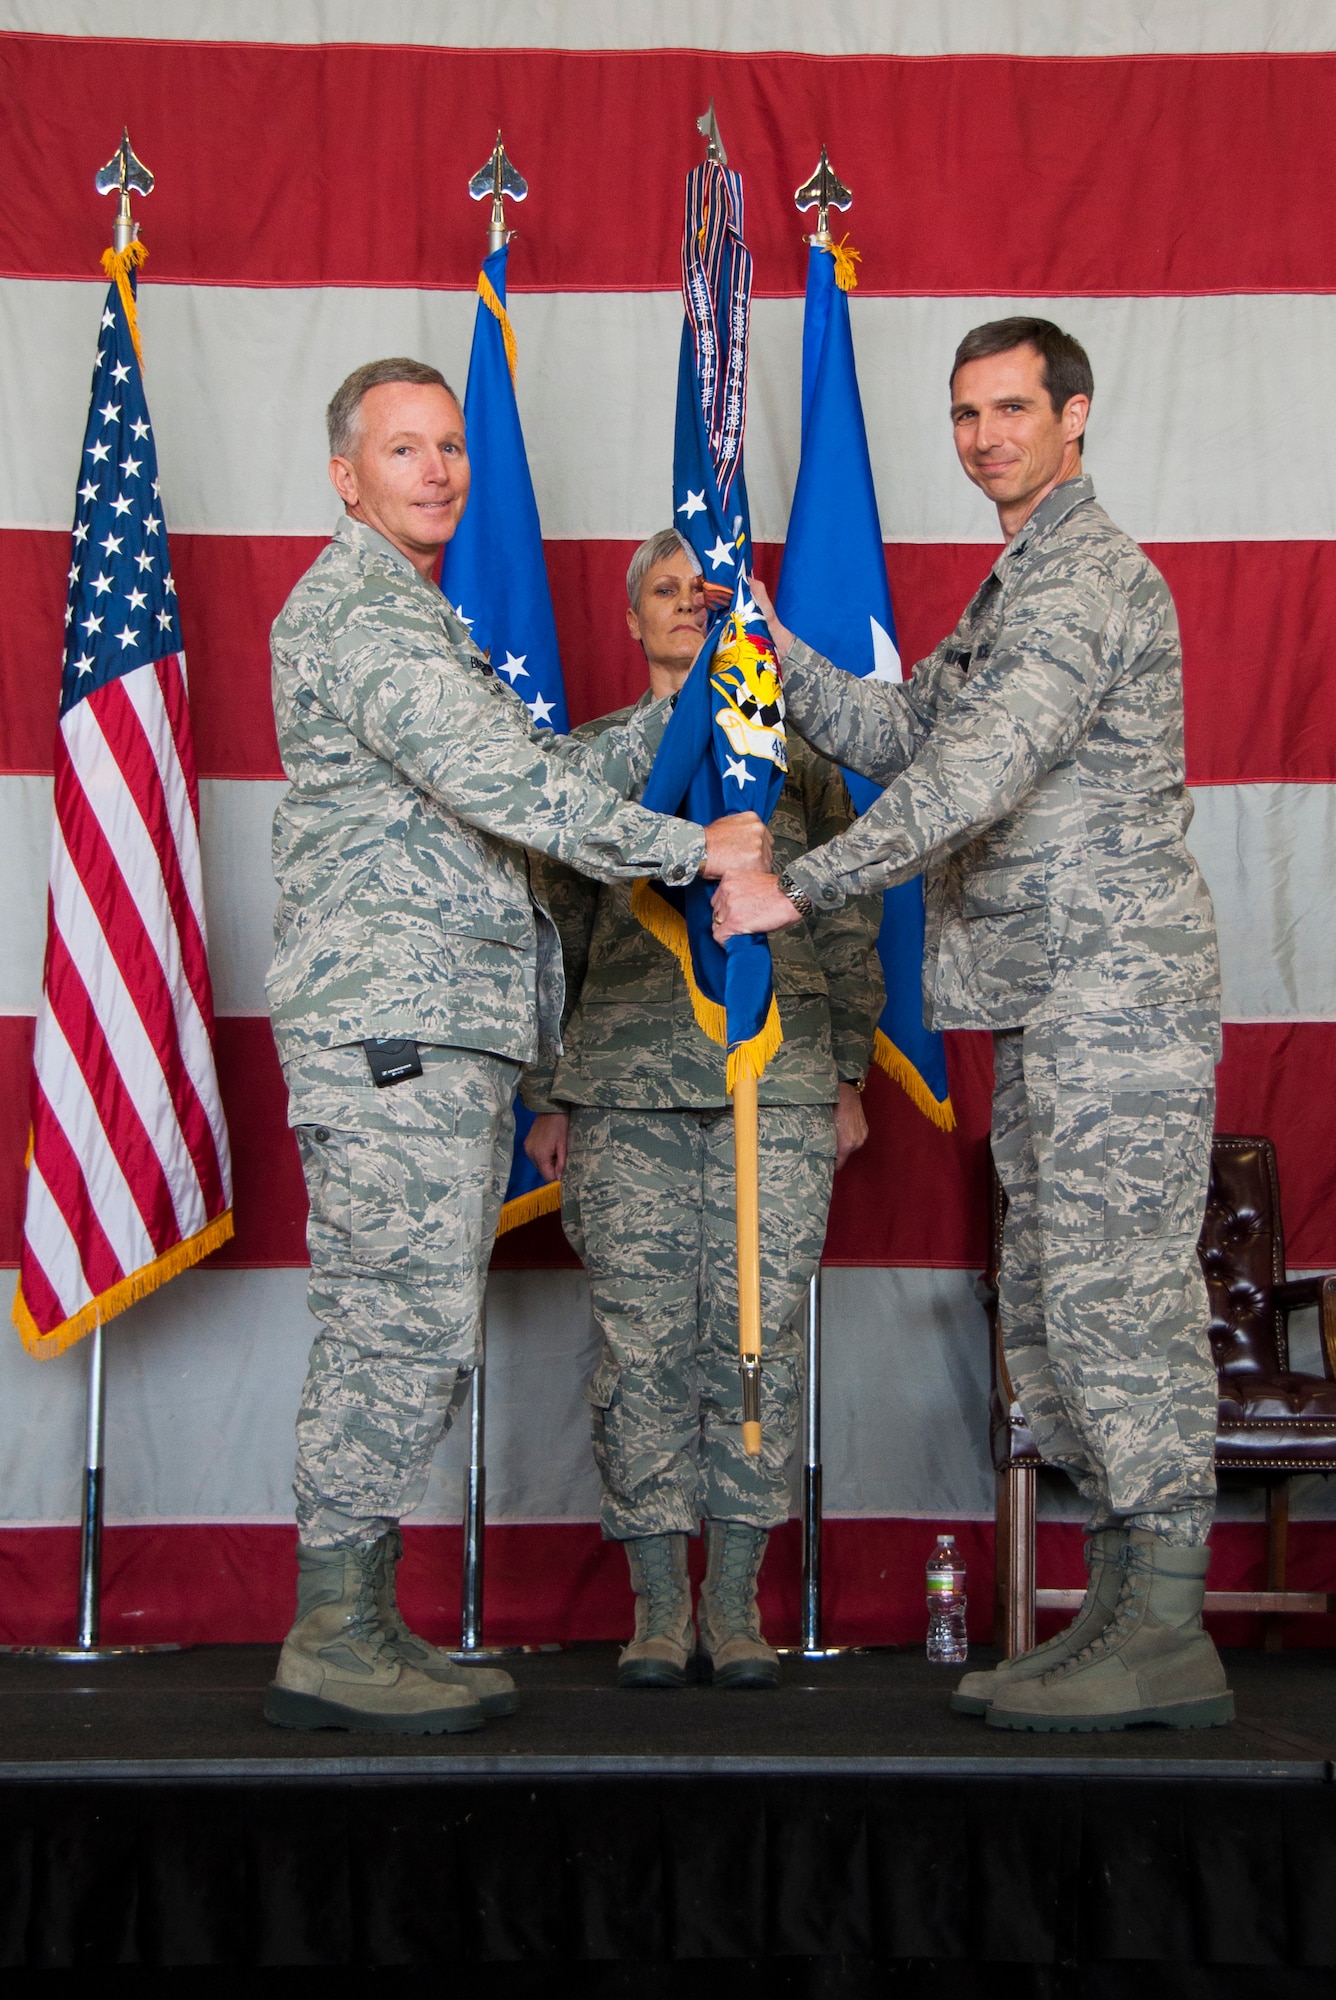 10th Air Force Commander, Brig. Gen. William Binger, passes the 419th Fighter Wing flag to Col. Bryan Radliff during a change of command ceremony here today. (U.S. Air Force photo/Senior Airman Crystal Charriere)